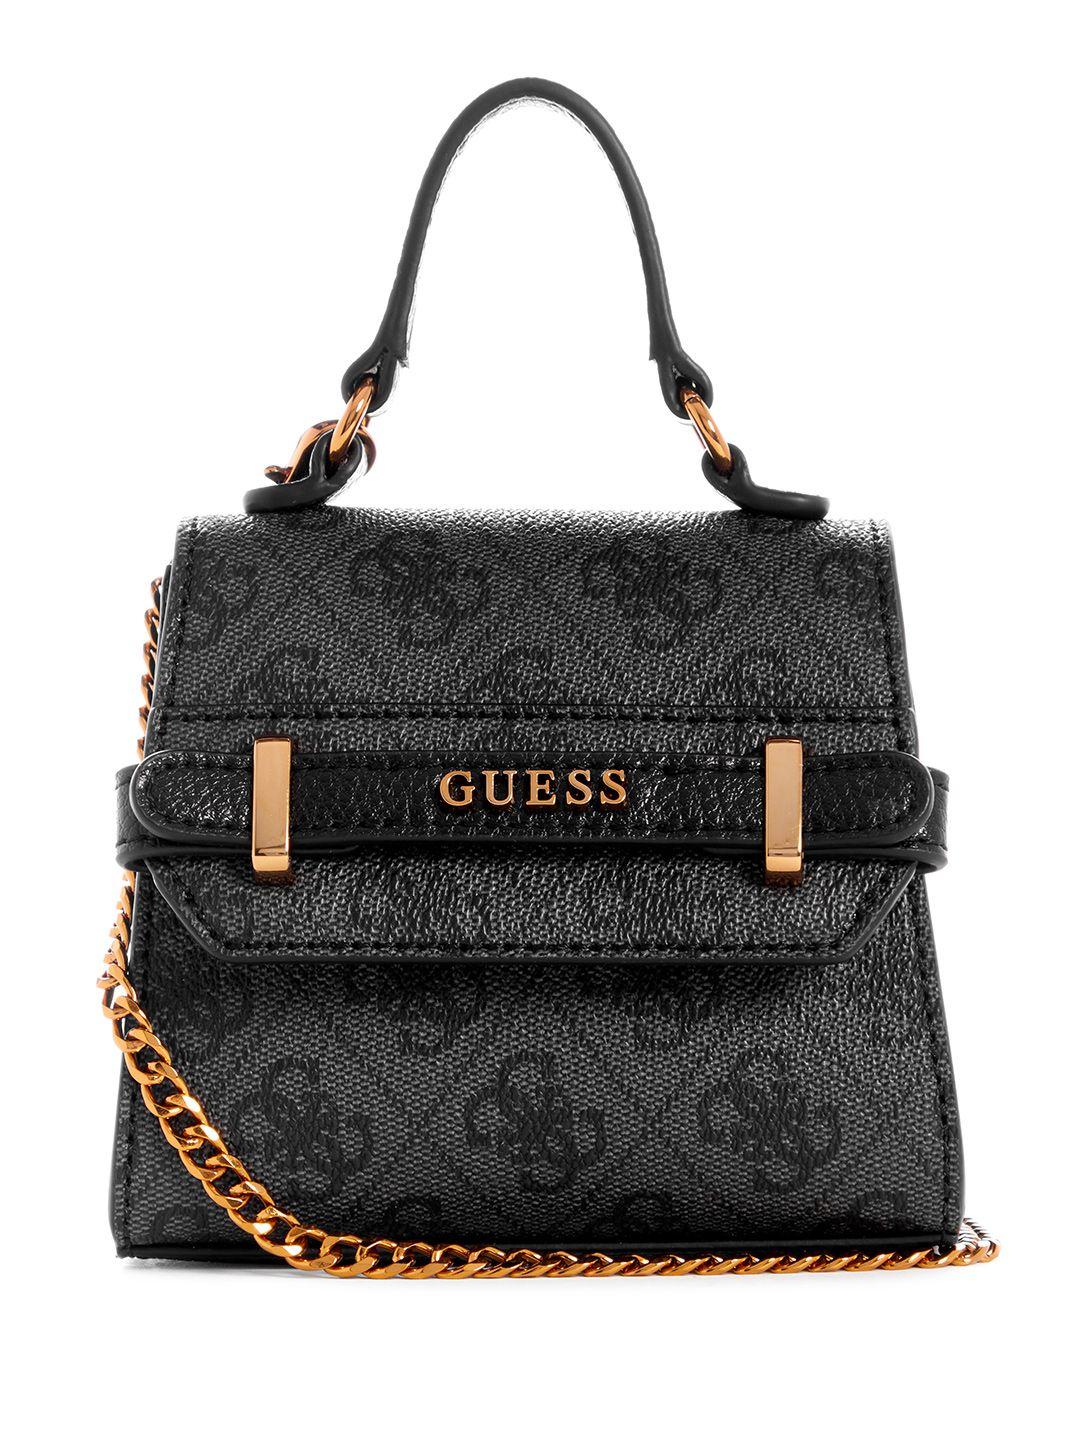 guess brand logo printed structured small satchel bag with brand logo detail